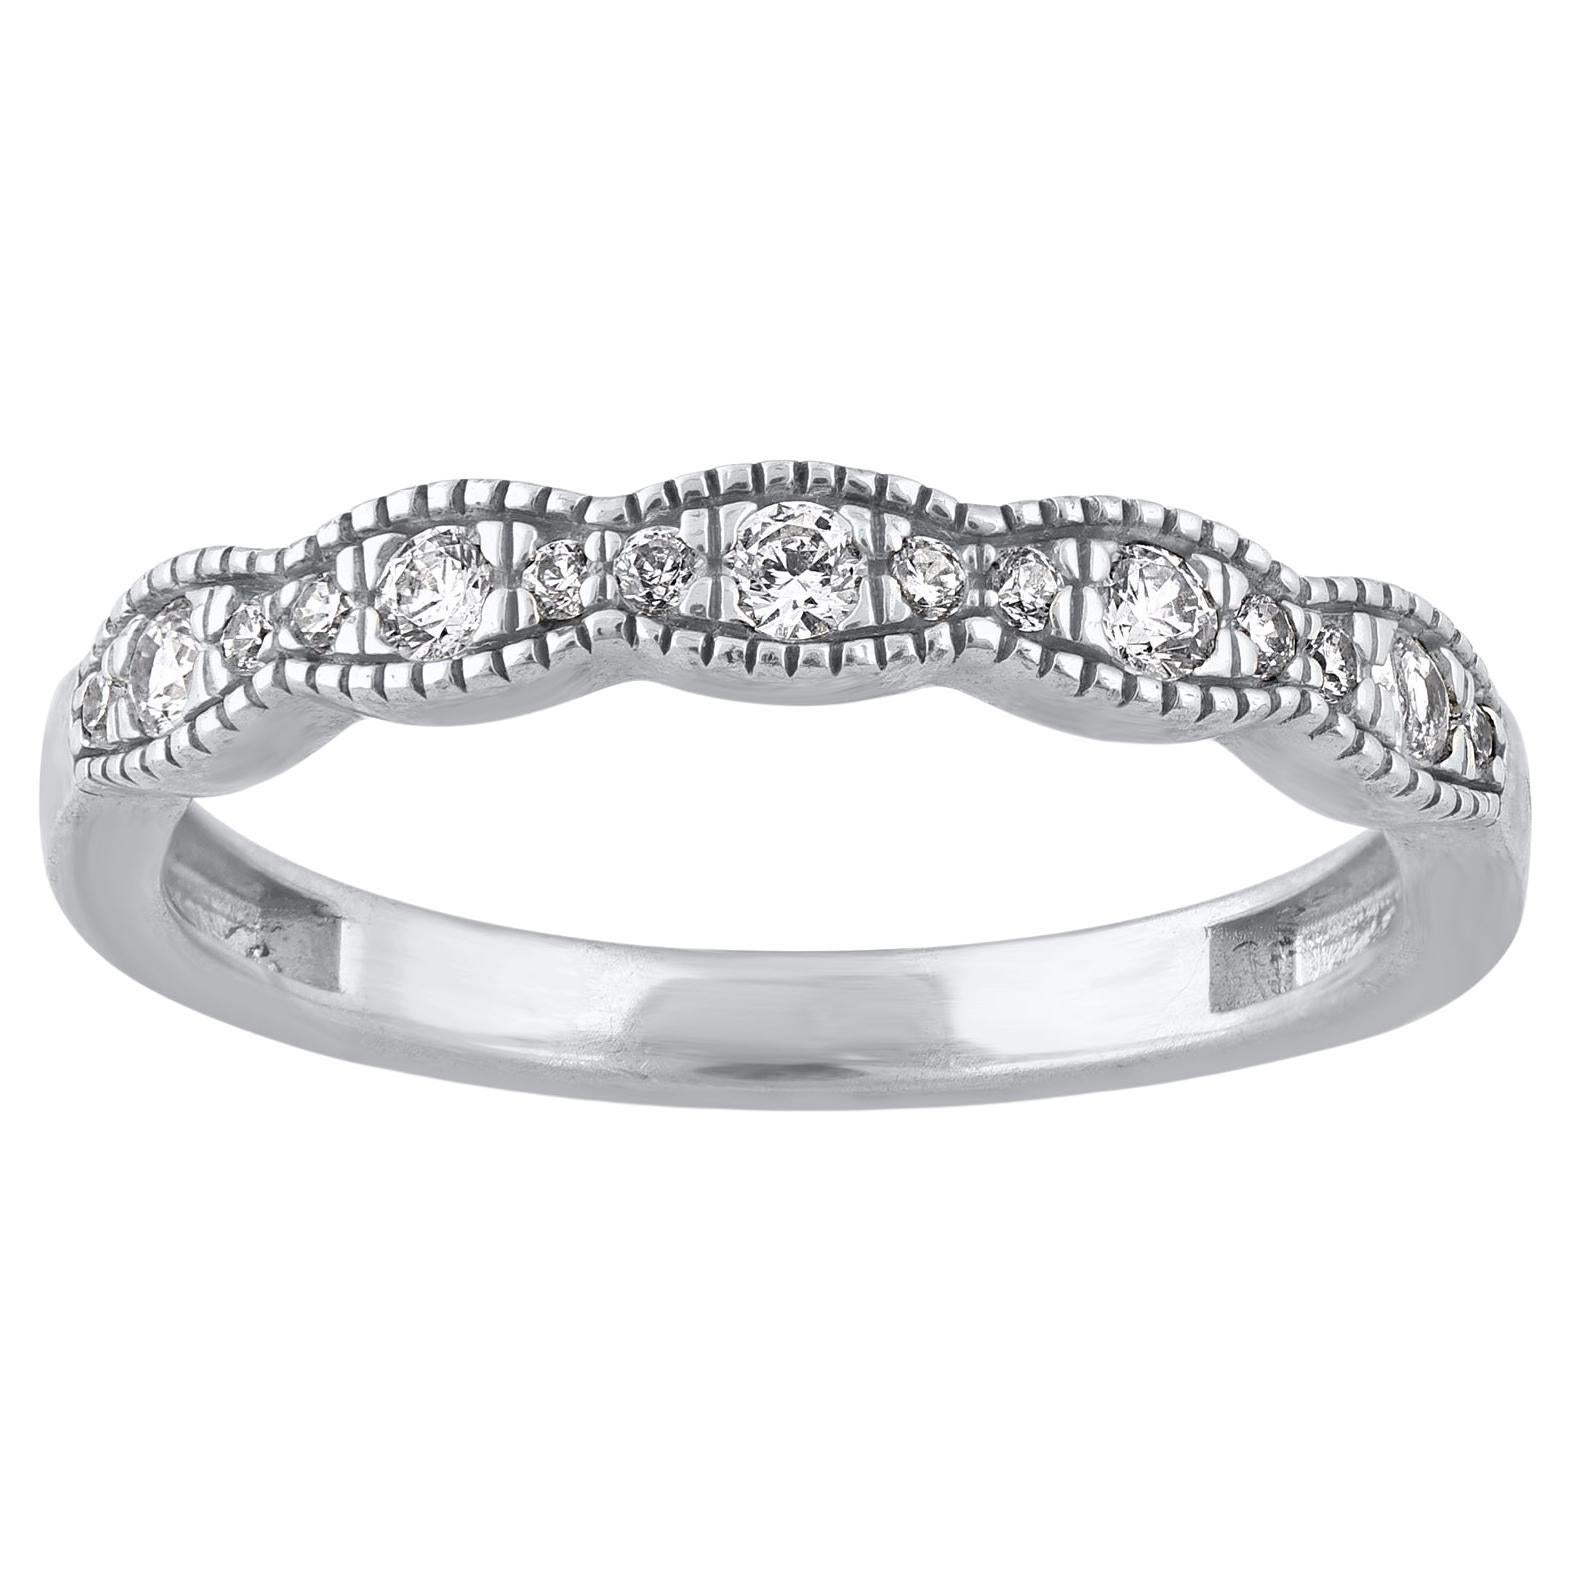 TJD 0.25 Carat Natural Diamond 14KT White Gold Scallop Edge Stackable Band Ring